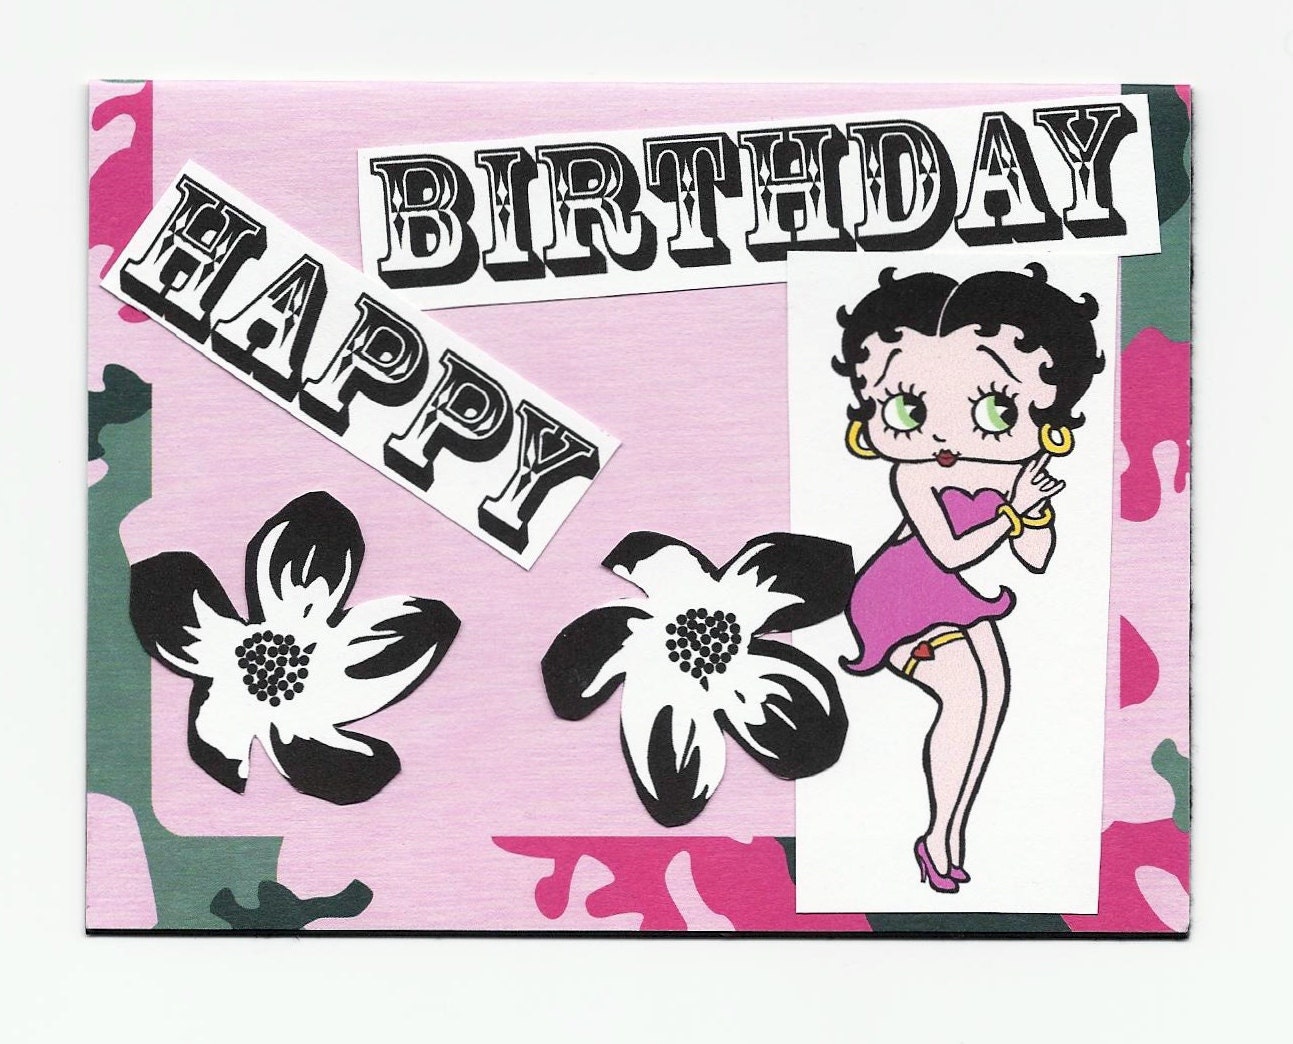 betty boop says